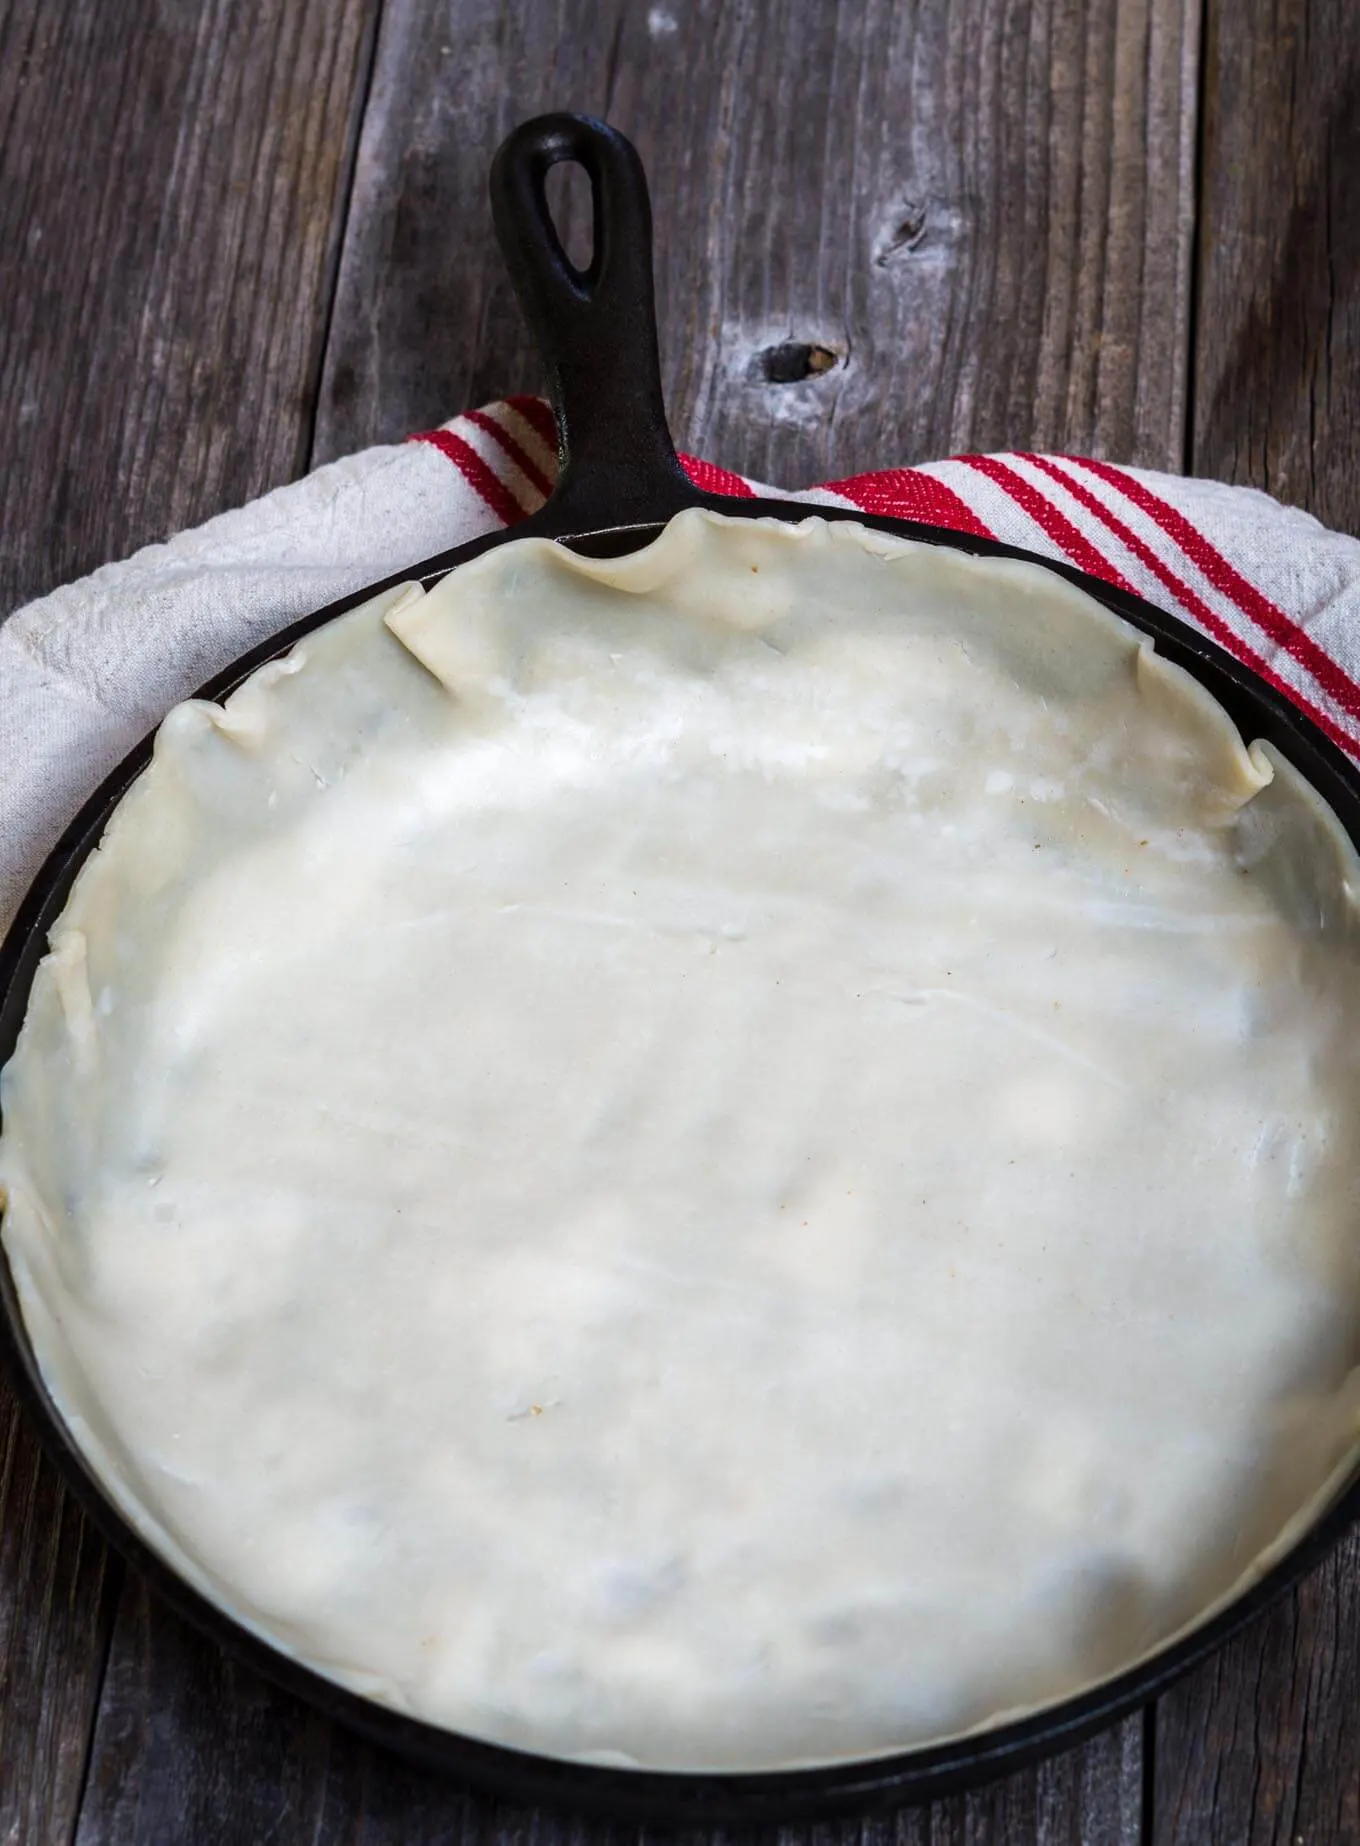 Cast Iron skillet lined with a rolled pie crust